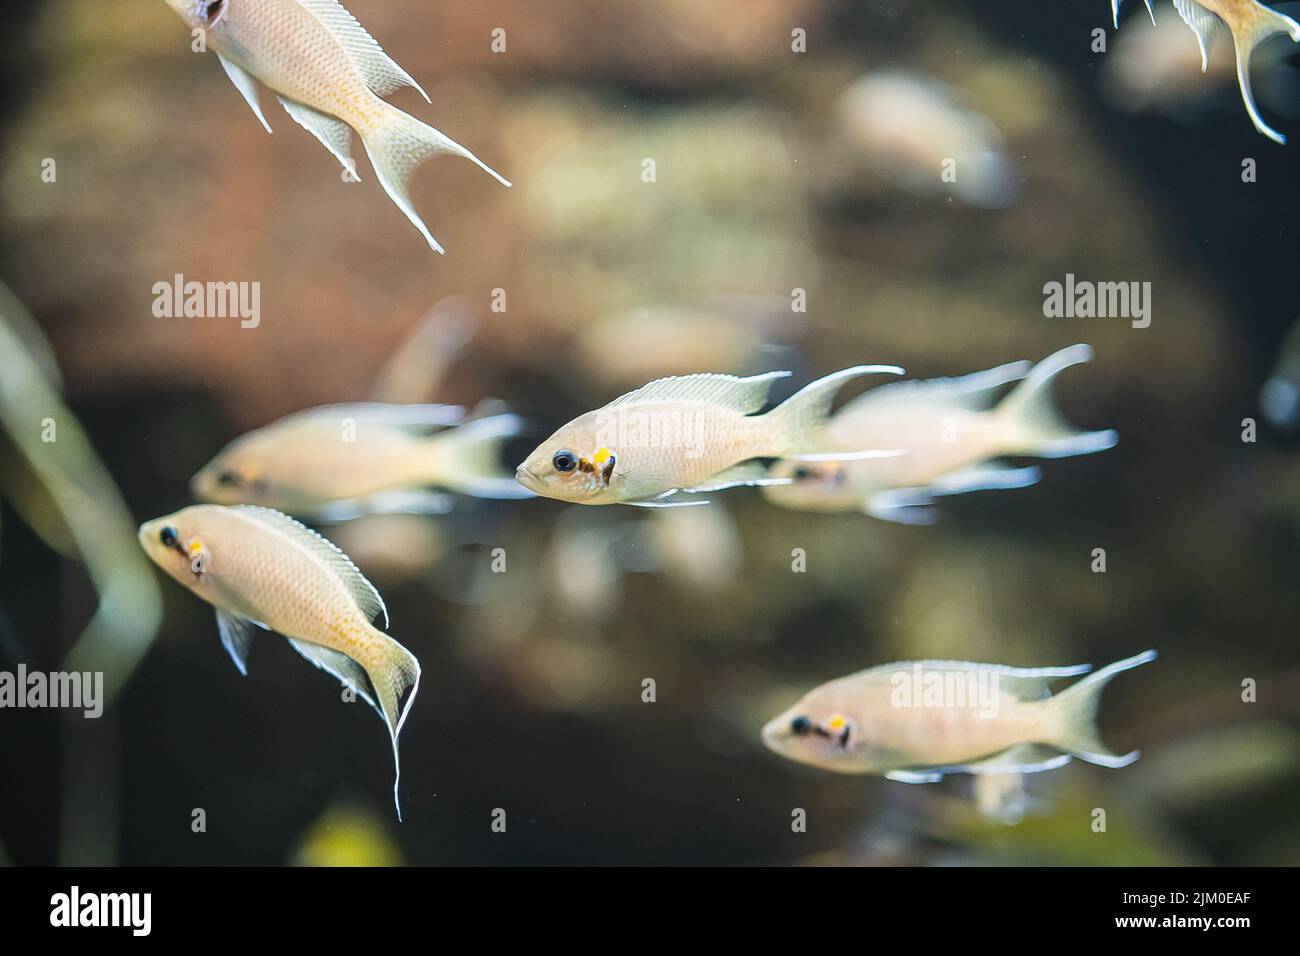 A closeup shot of a school of African cichlid fish swimming underwater Stock Photo